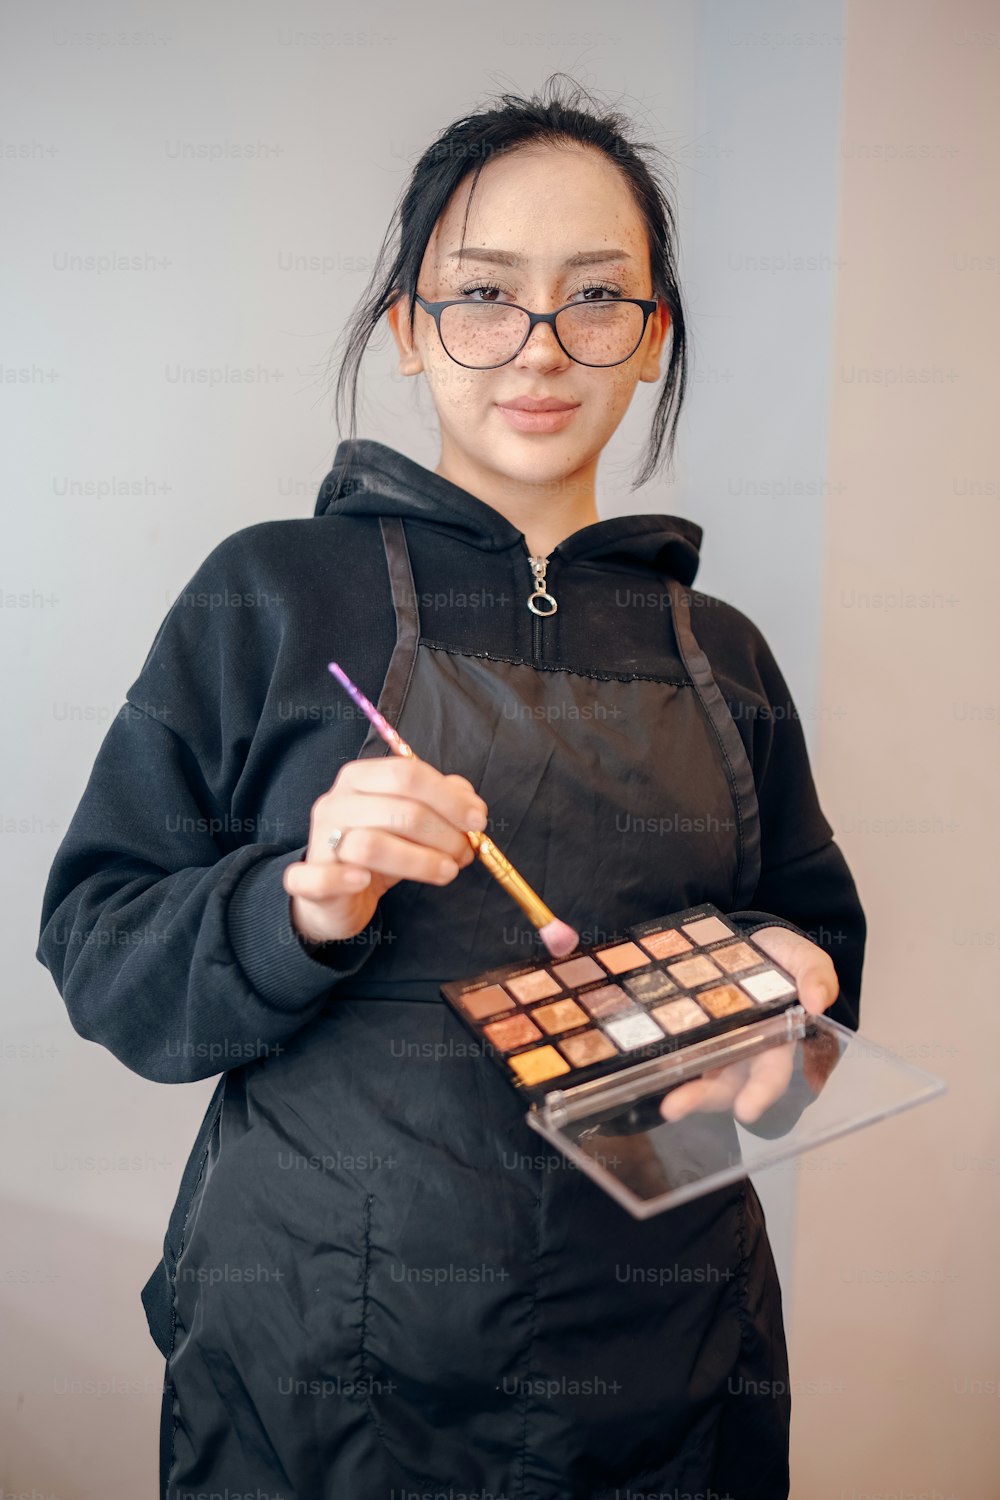 a woman is holding a palette and a pencil